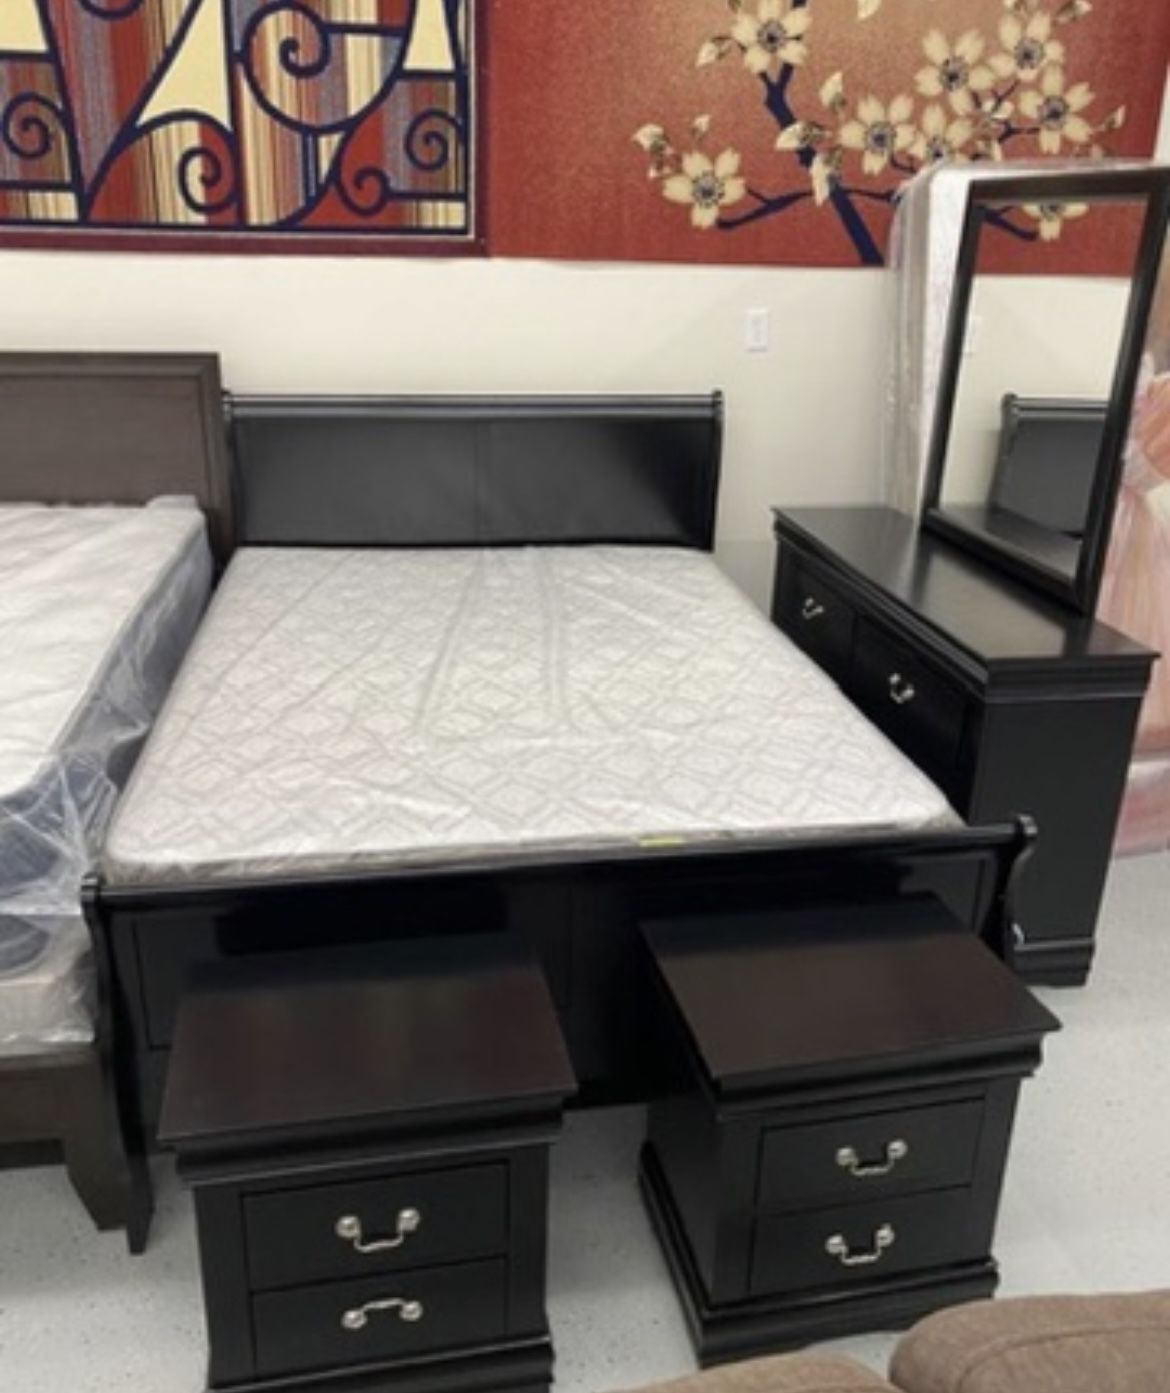 Furniture, Mattress, Boxspring, Bedframe, Bunk, Bed, Chest Dresser, Your Nightstand